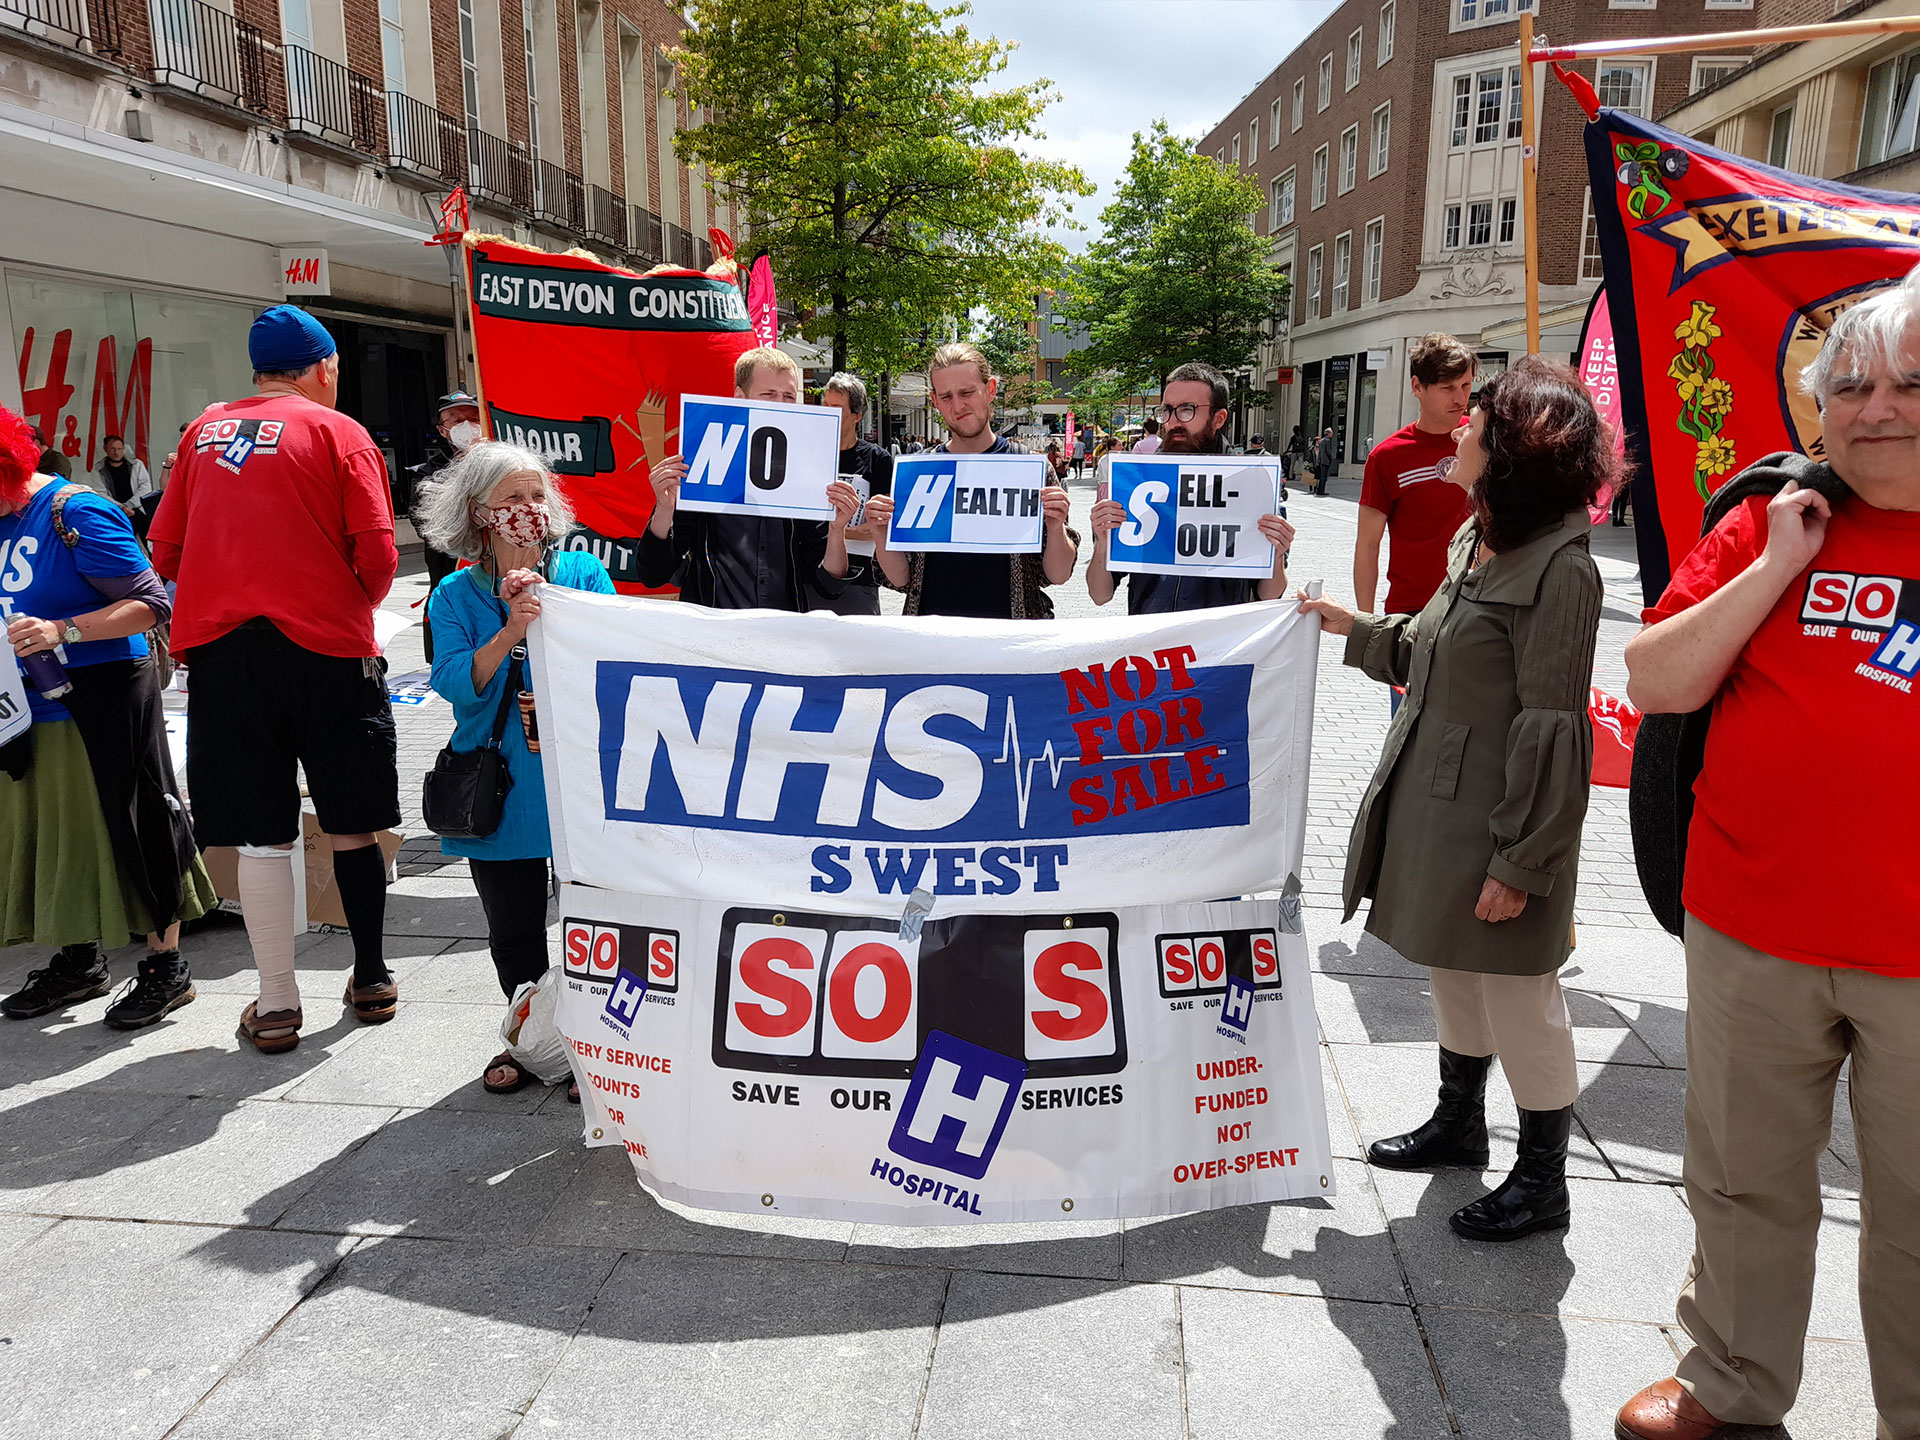 SOHS and KONP protesters with a banner which says NHS not for Sale South West